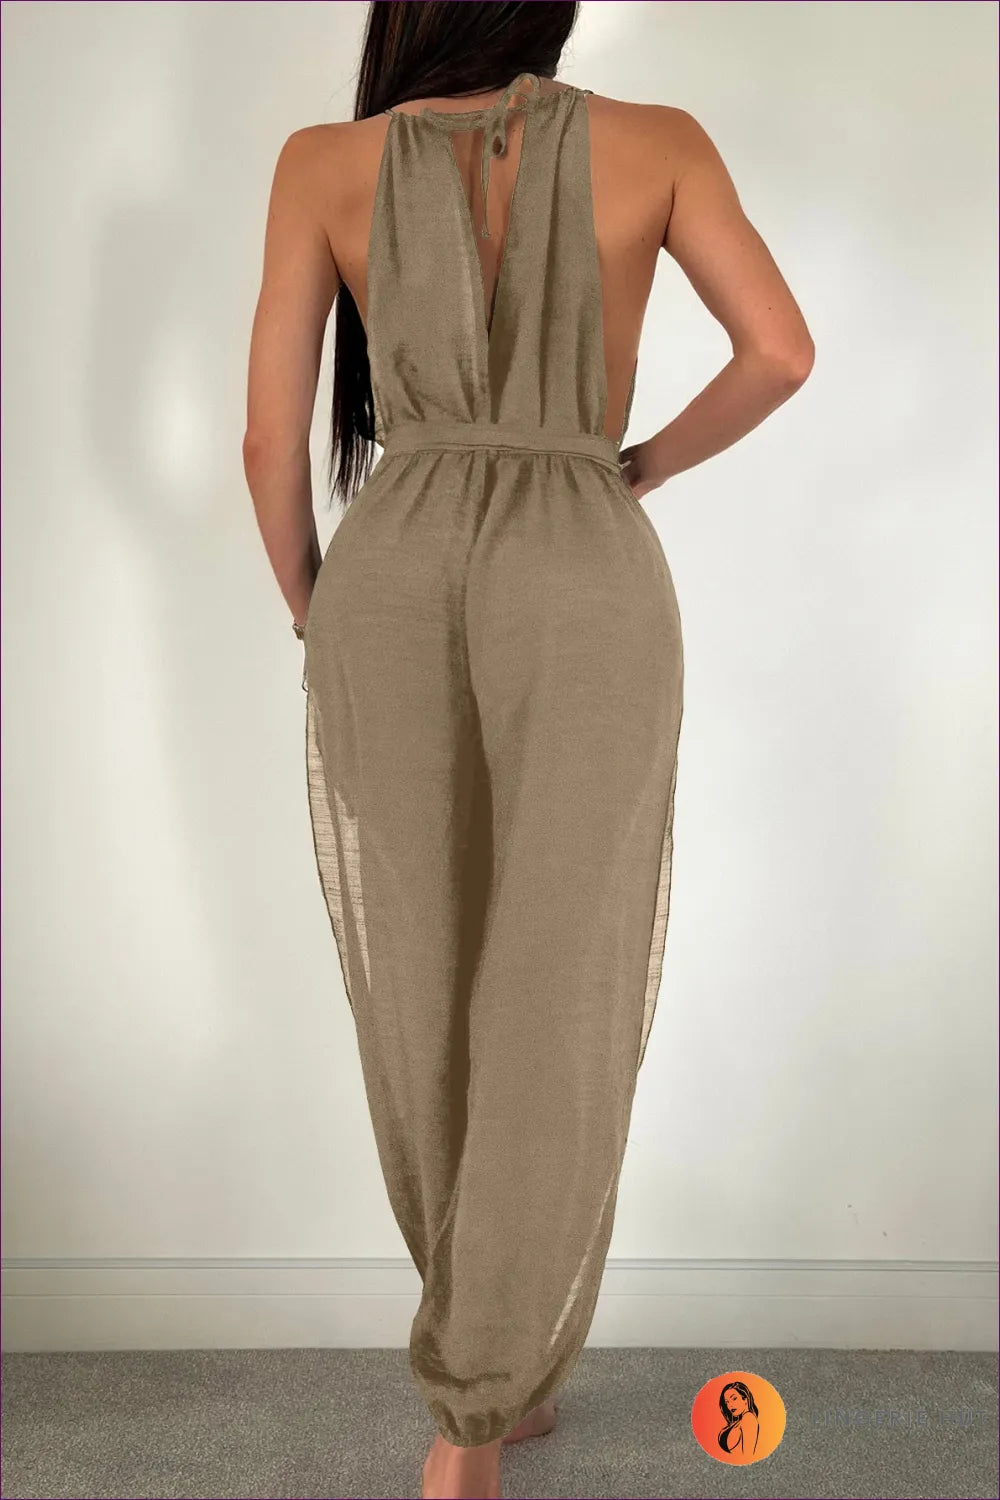 Elevate Your Beach Style With Our Sleeveless Tie-waist Jumpsuit Cover-up. Cool, Chic, And Sun-protective, It’s